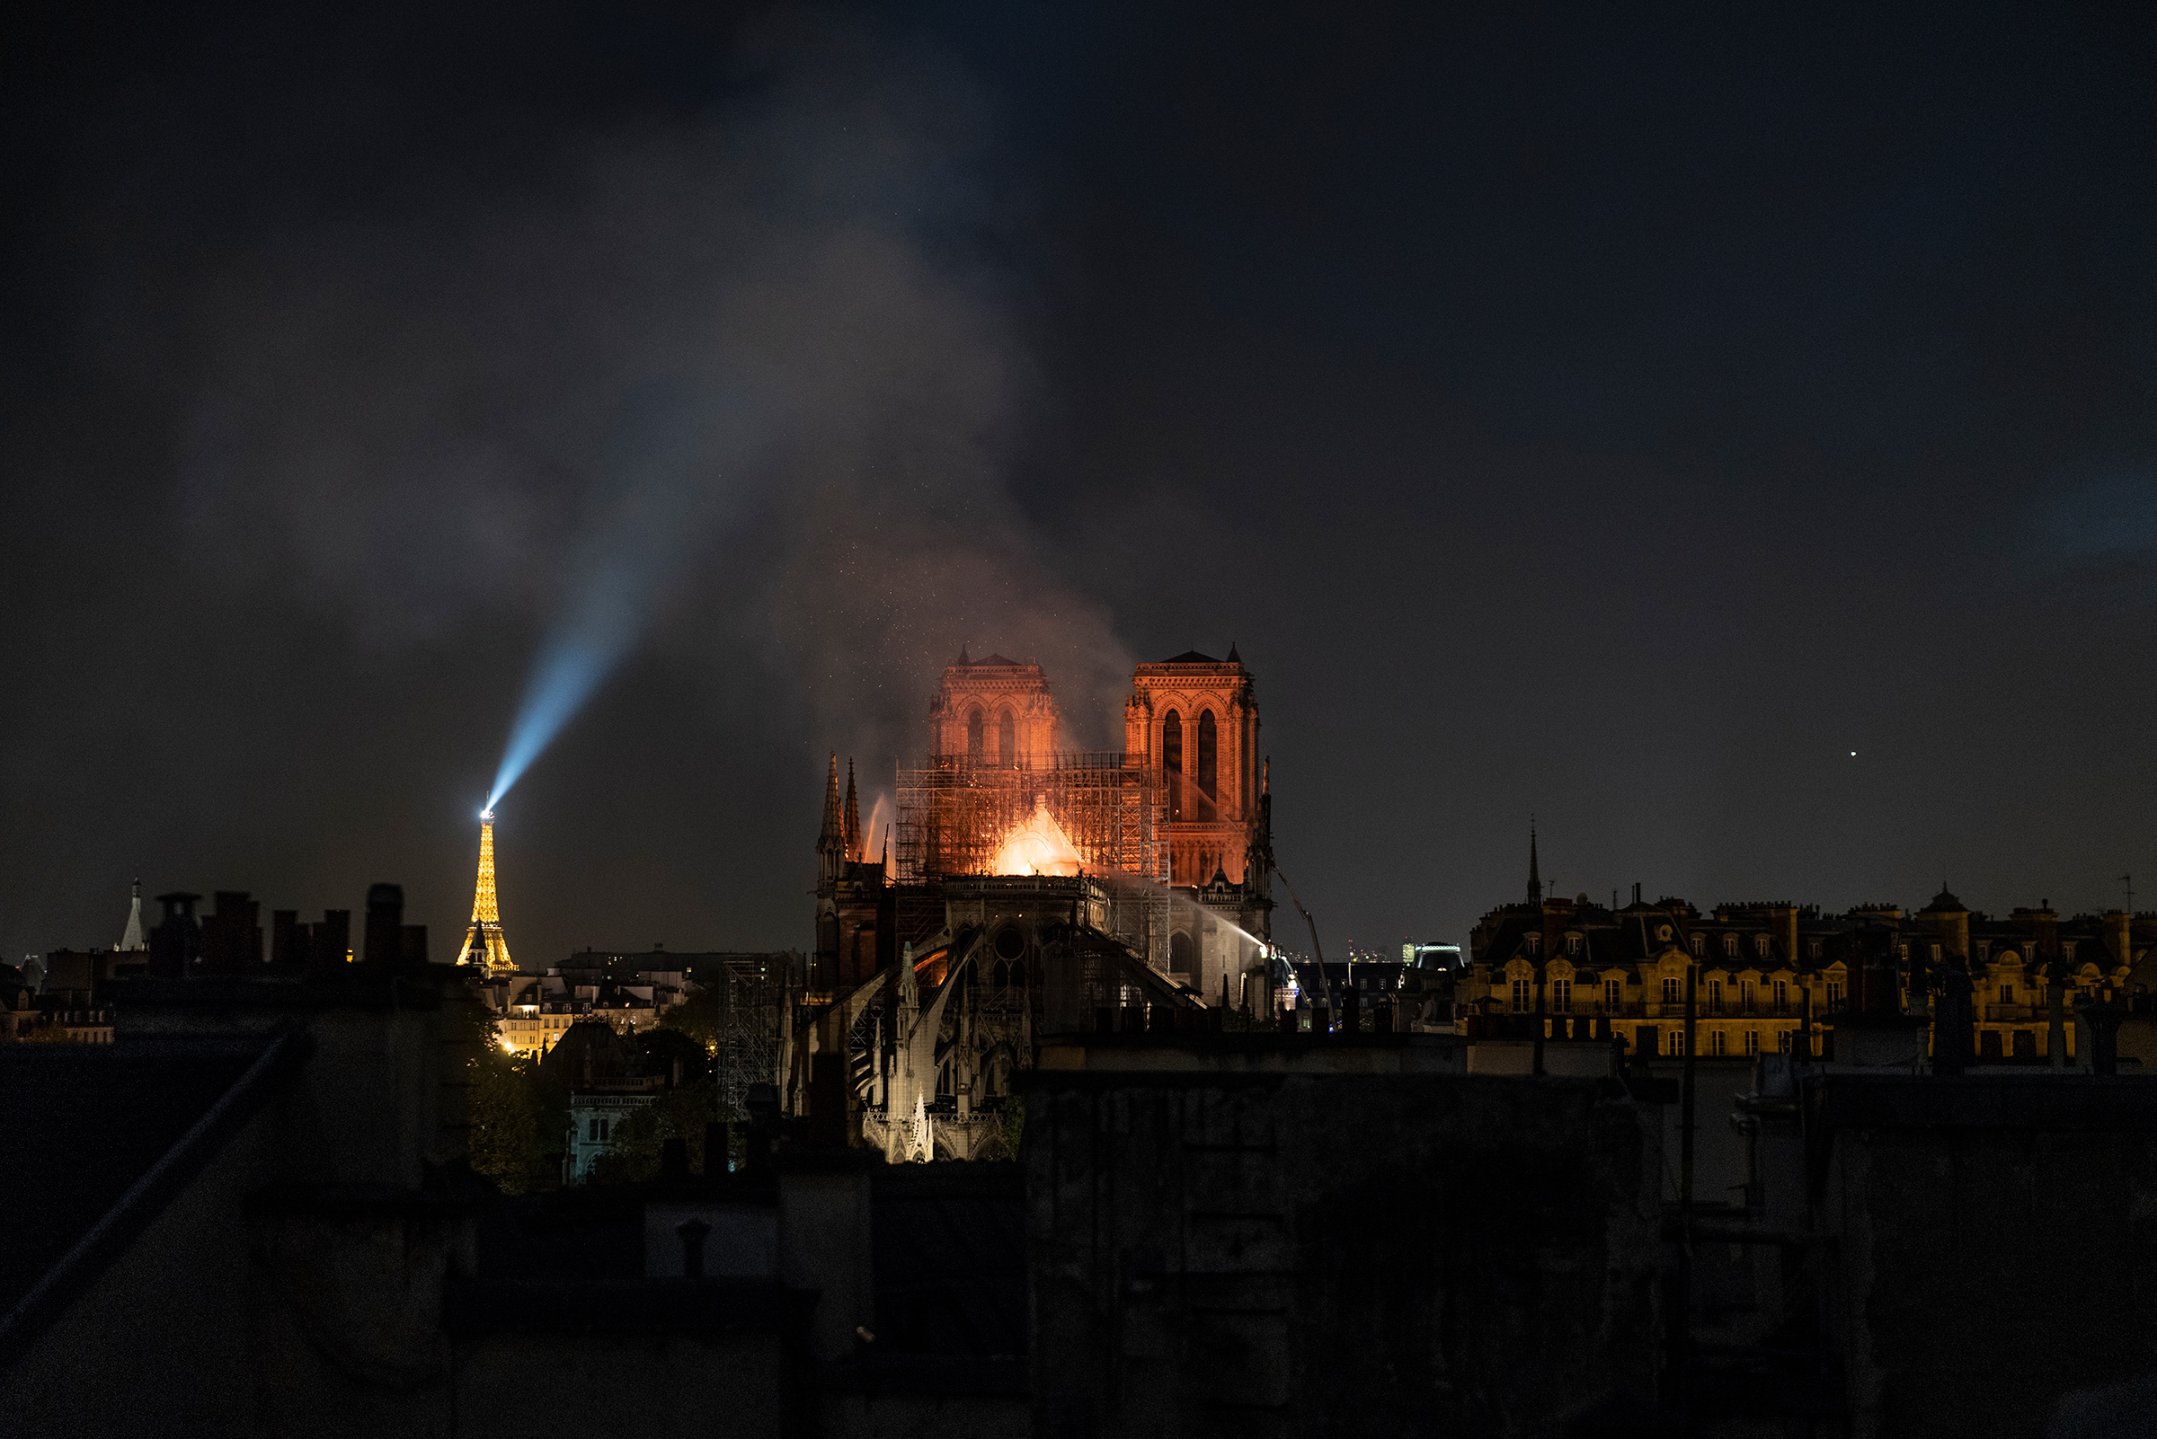 Smoke and flames rise from Notre Dame in Paris on April 15. The city was in flames months before the blaze at the cathedral. Protesters enraged over President Emmanuel Macron's economic plans had smashed storefronts and vandalized ATMs. But the smoke that filled the sky that day seemed to give the beleaguered city a sense of unity. Soon, another took hold: how to rebuild?